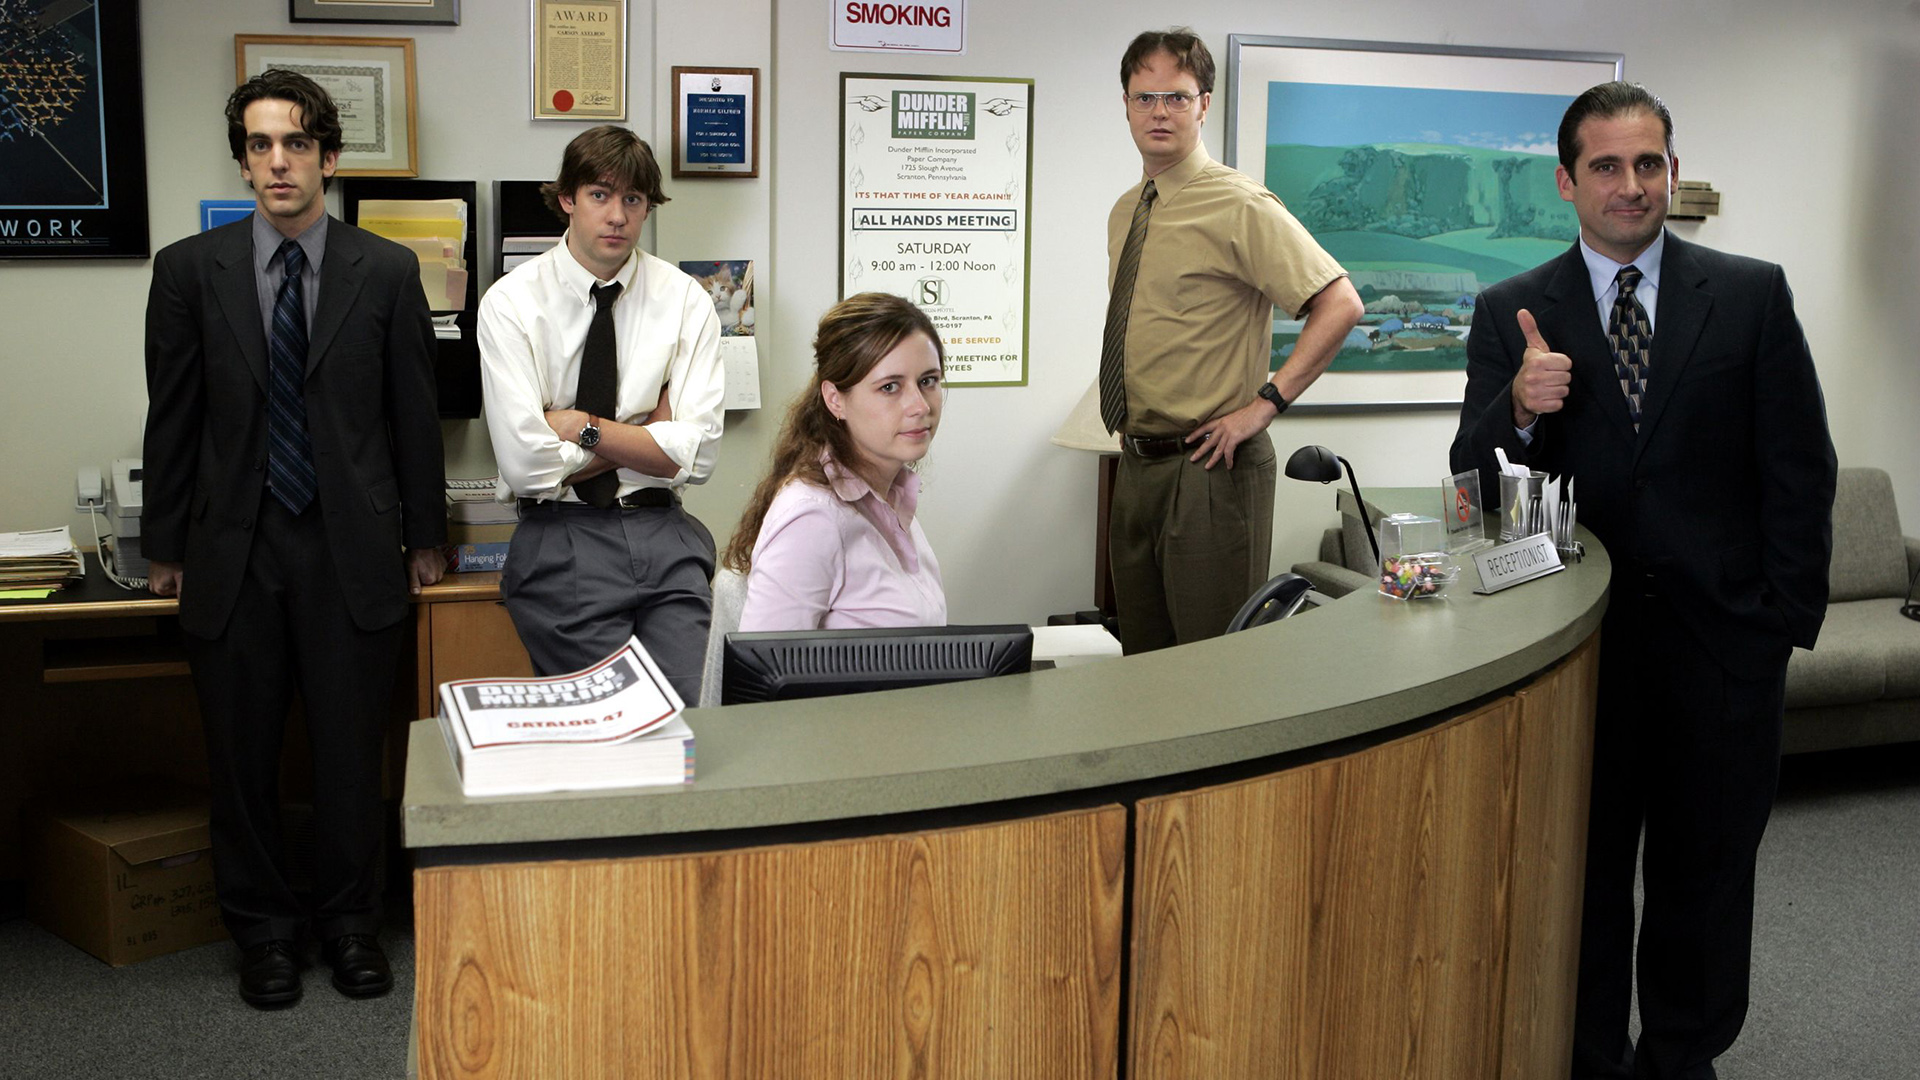 TV Show The Office (US) HD Wallpaper | Background Image